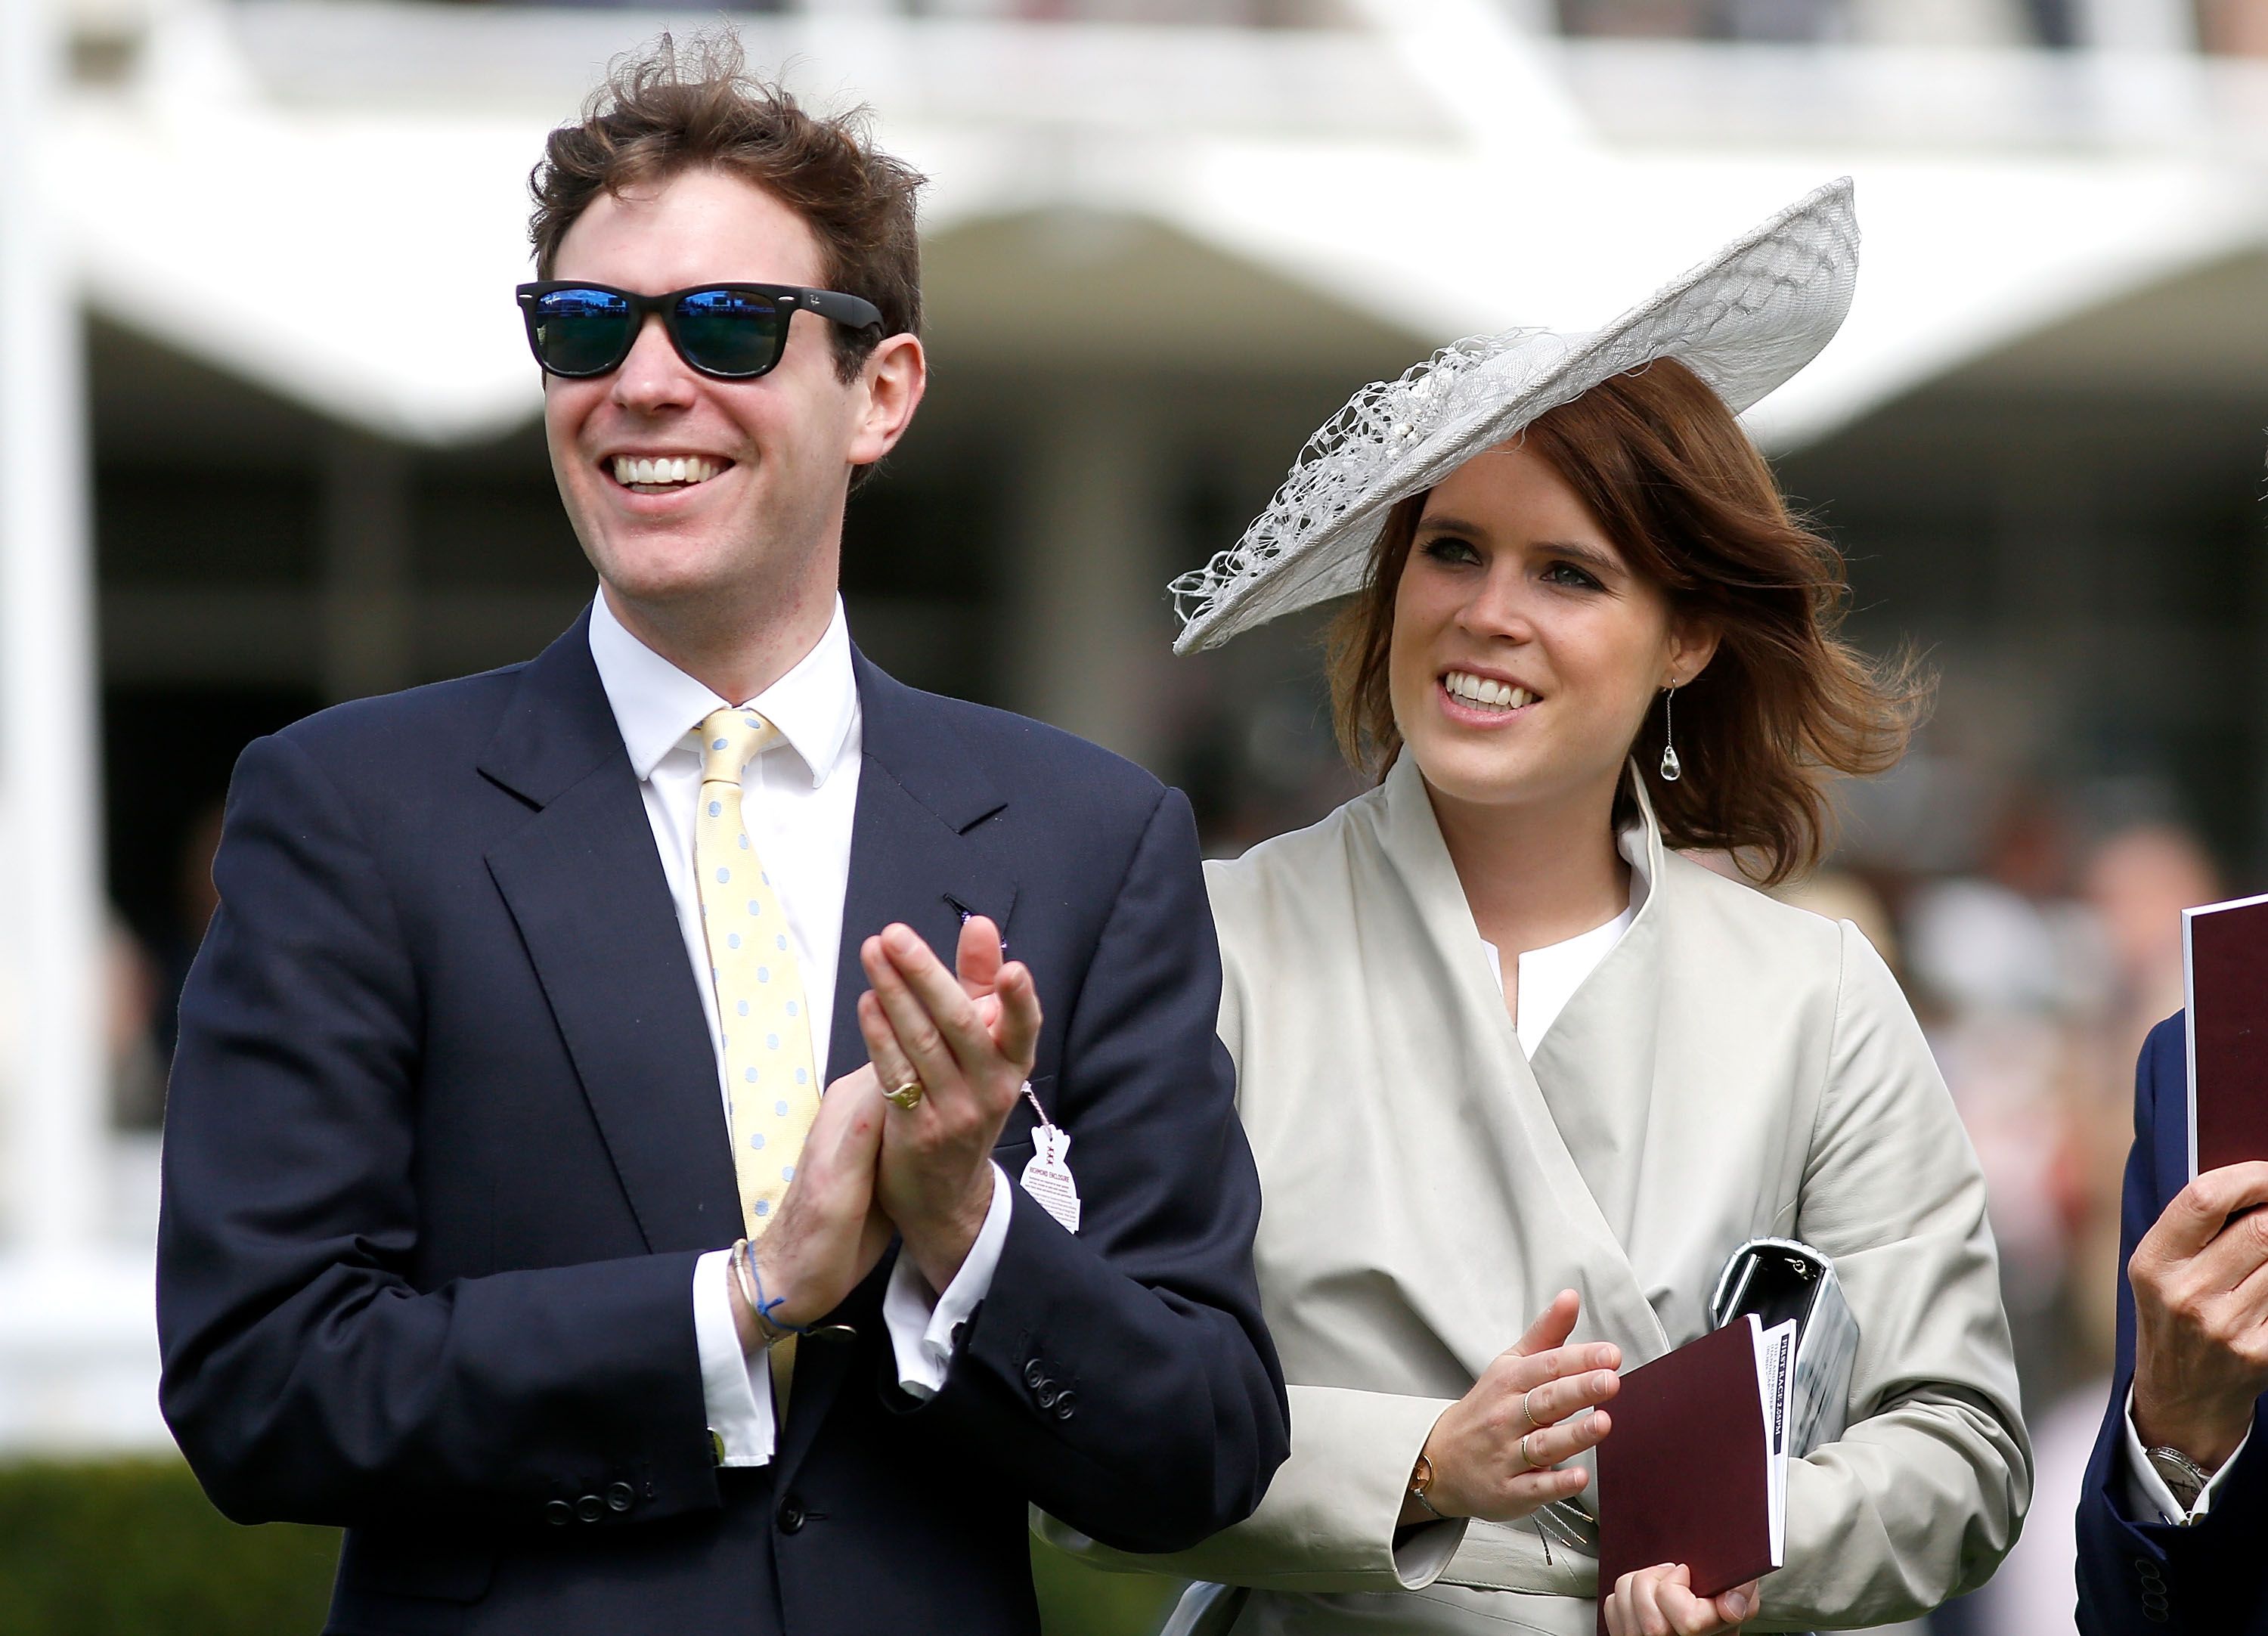 Princess Eugenie and Jack Brooksbank at day three of the Qatar Goodwood Festival at Goodwood Racecourse on July 30, 2015 in Chichester, England. | Photo: Getty Images